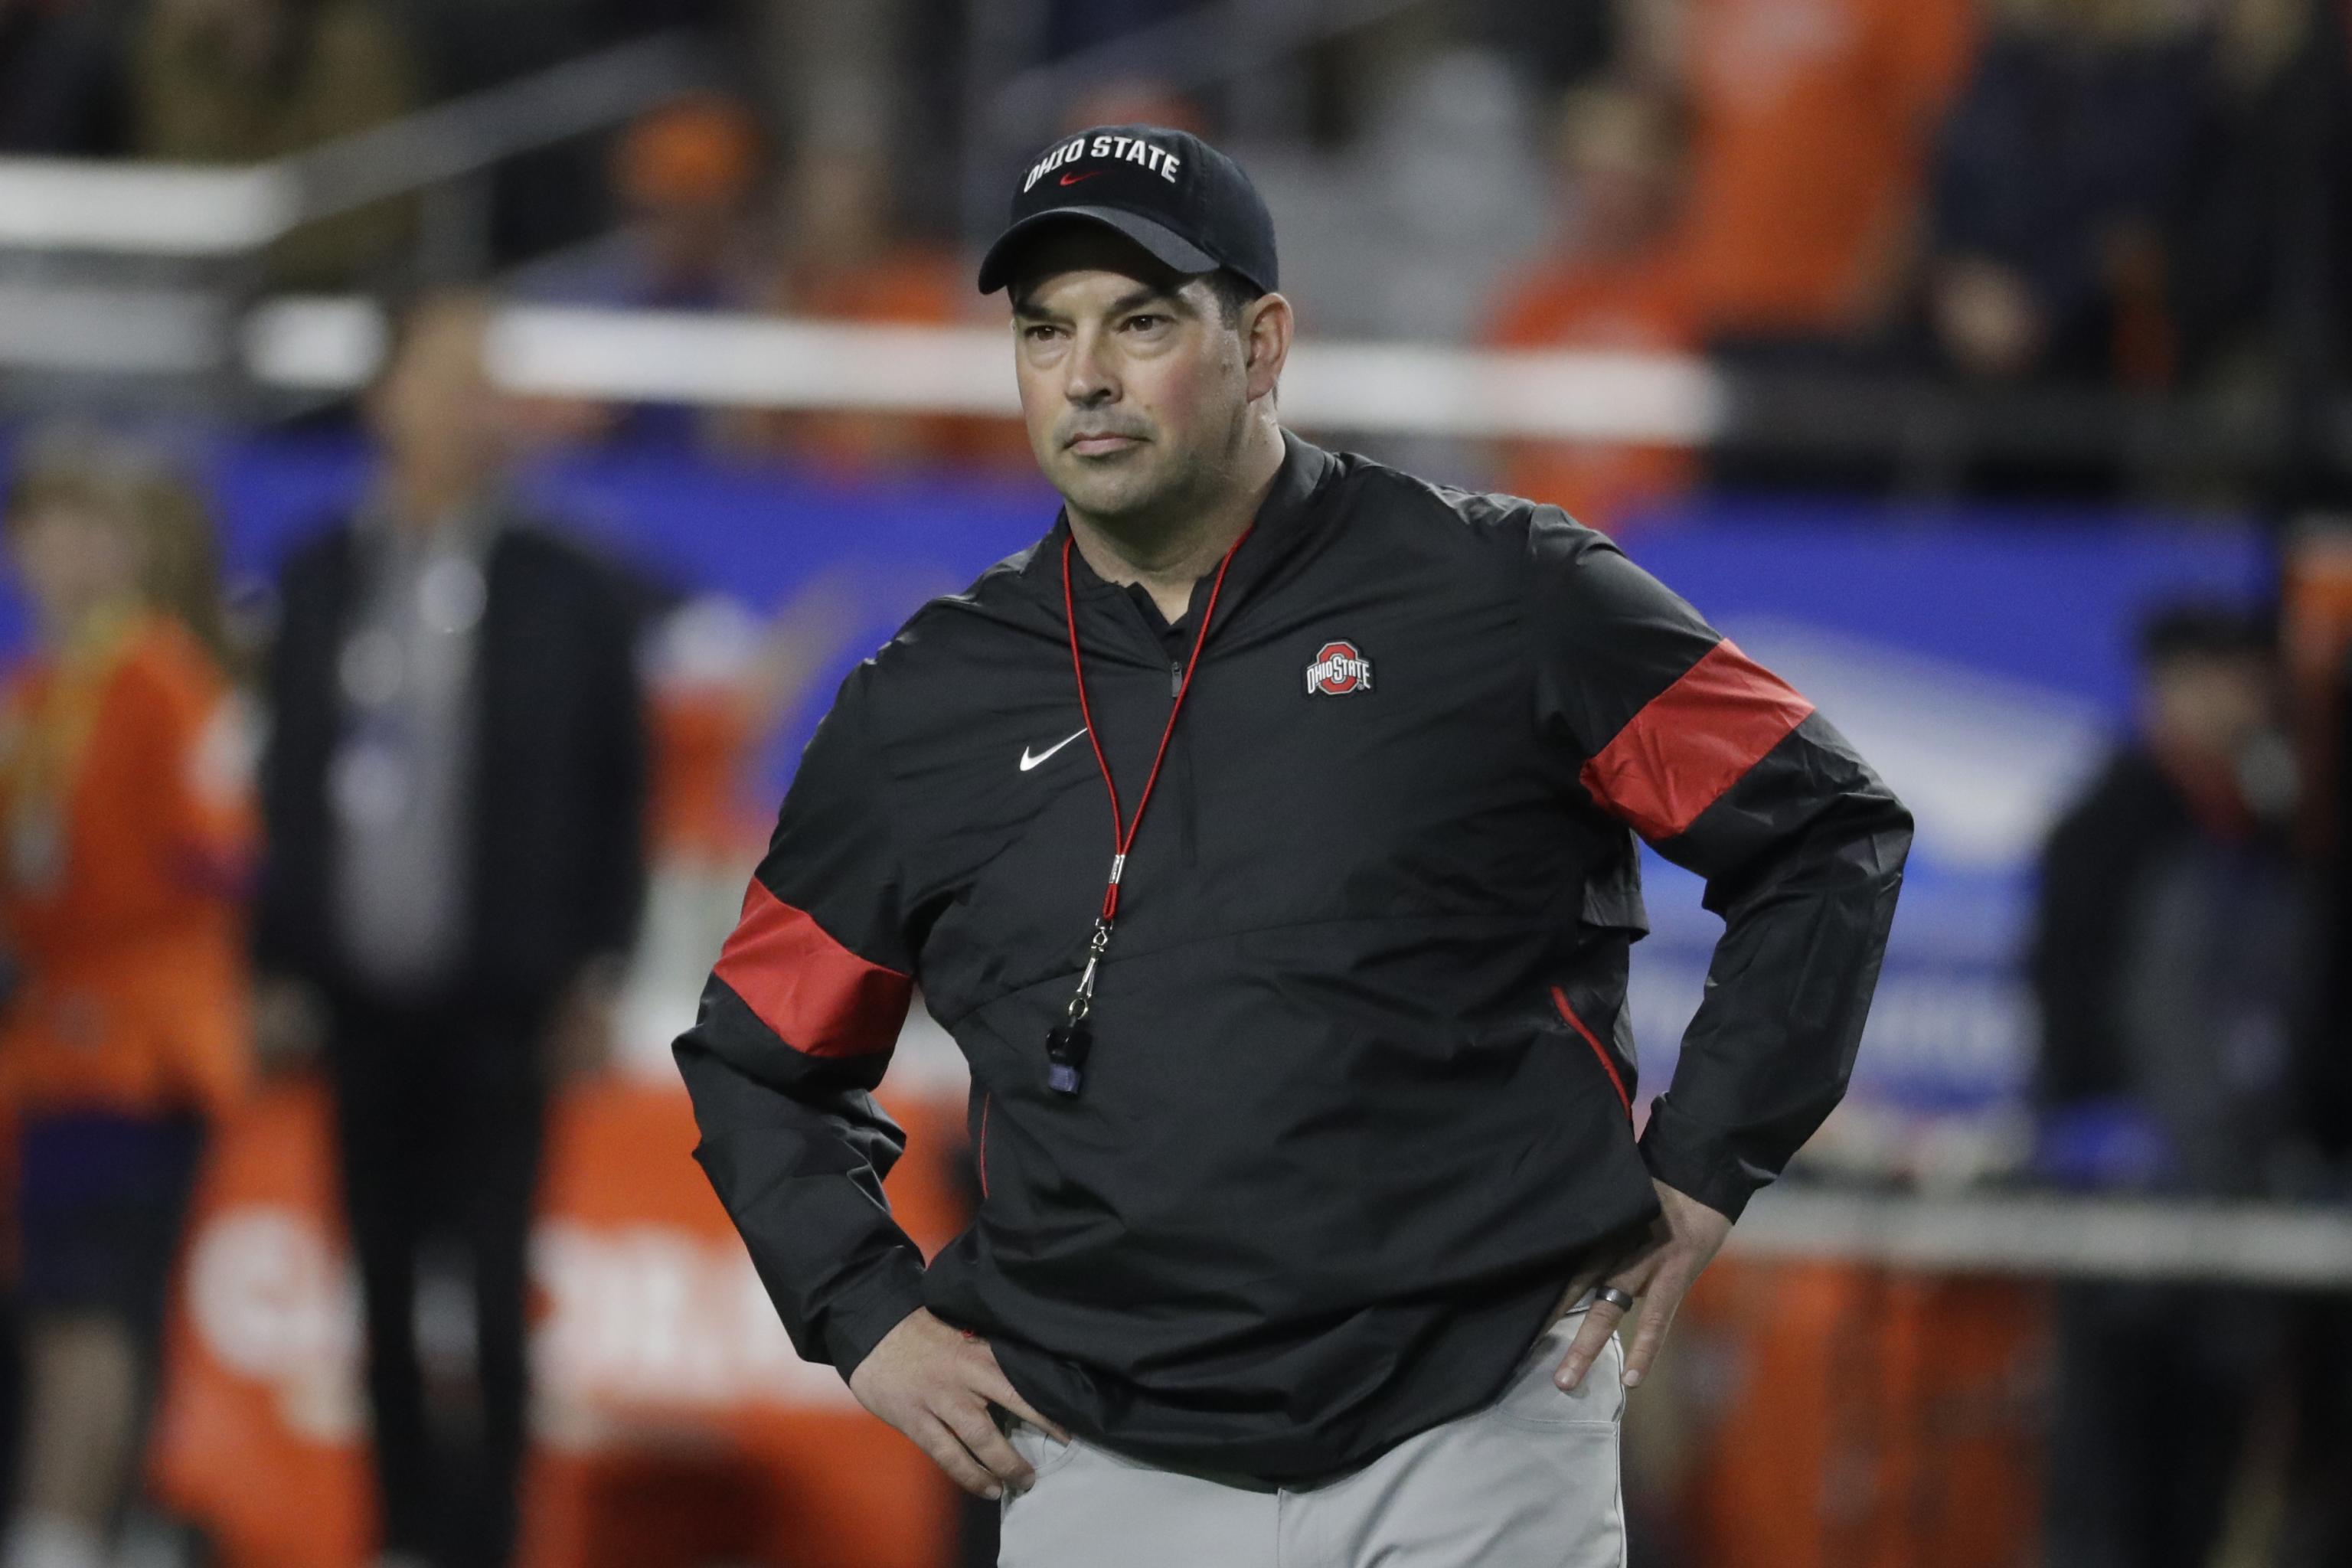 Ryan Day Salary, Contract, & Buyout at Ohio State - Boardroom